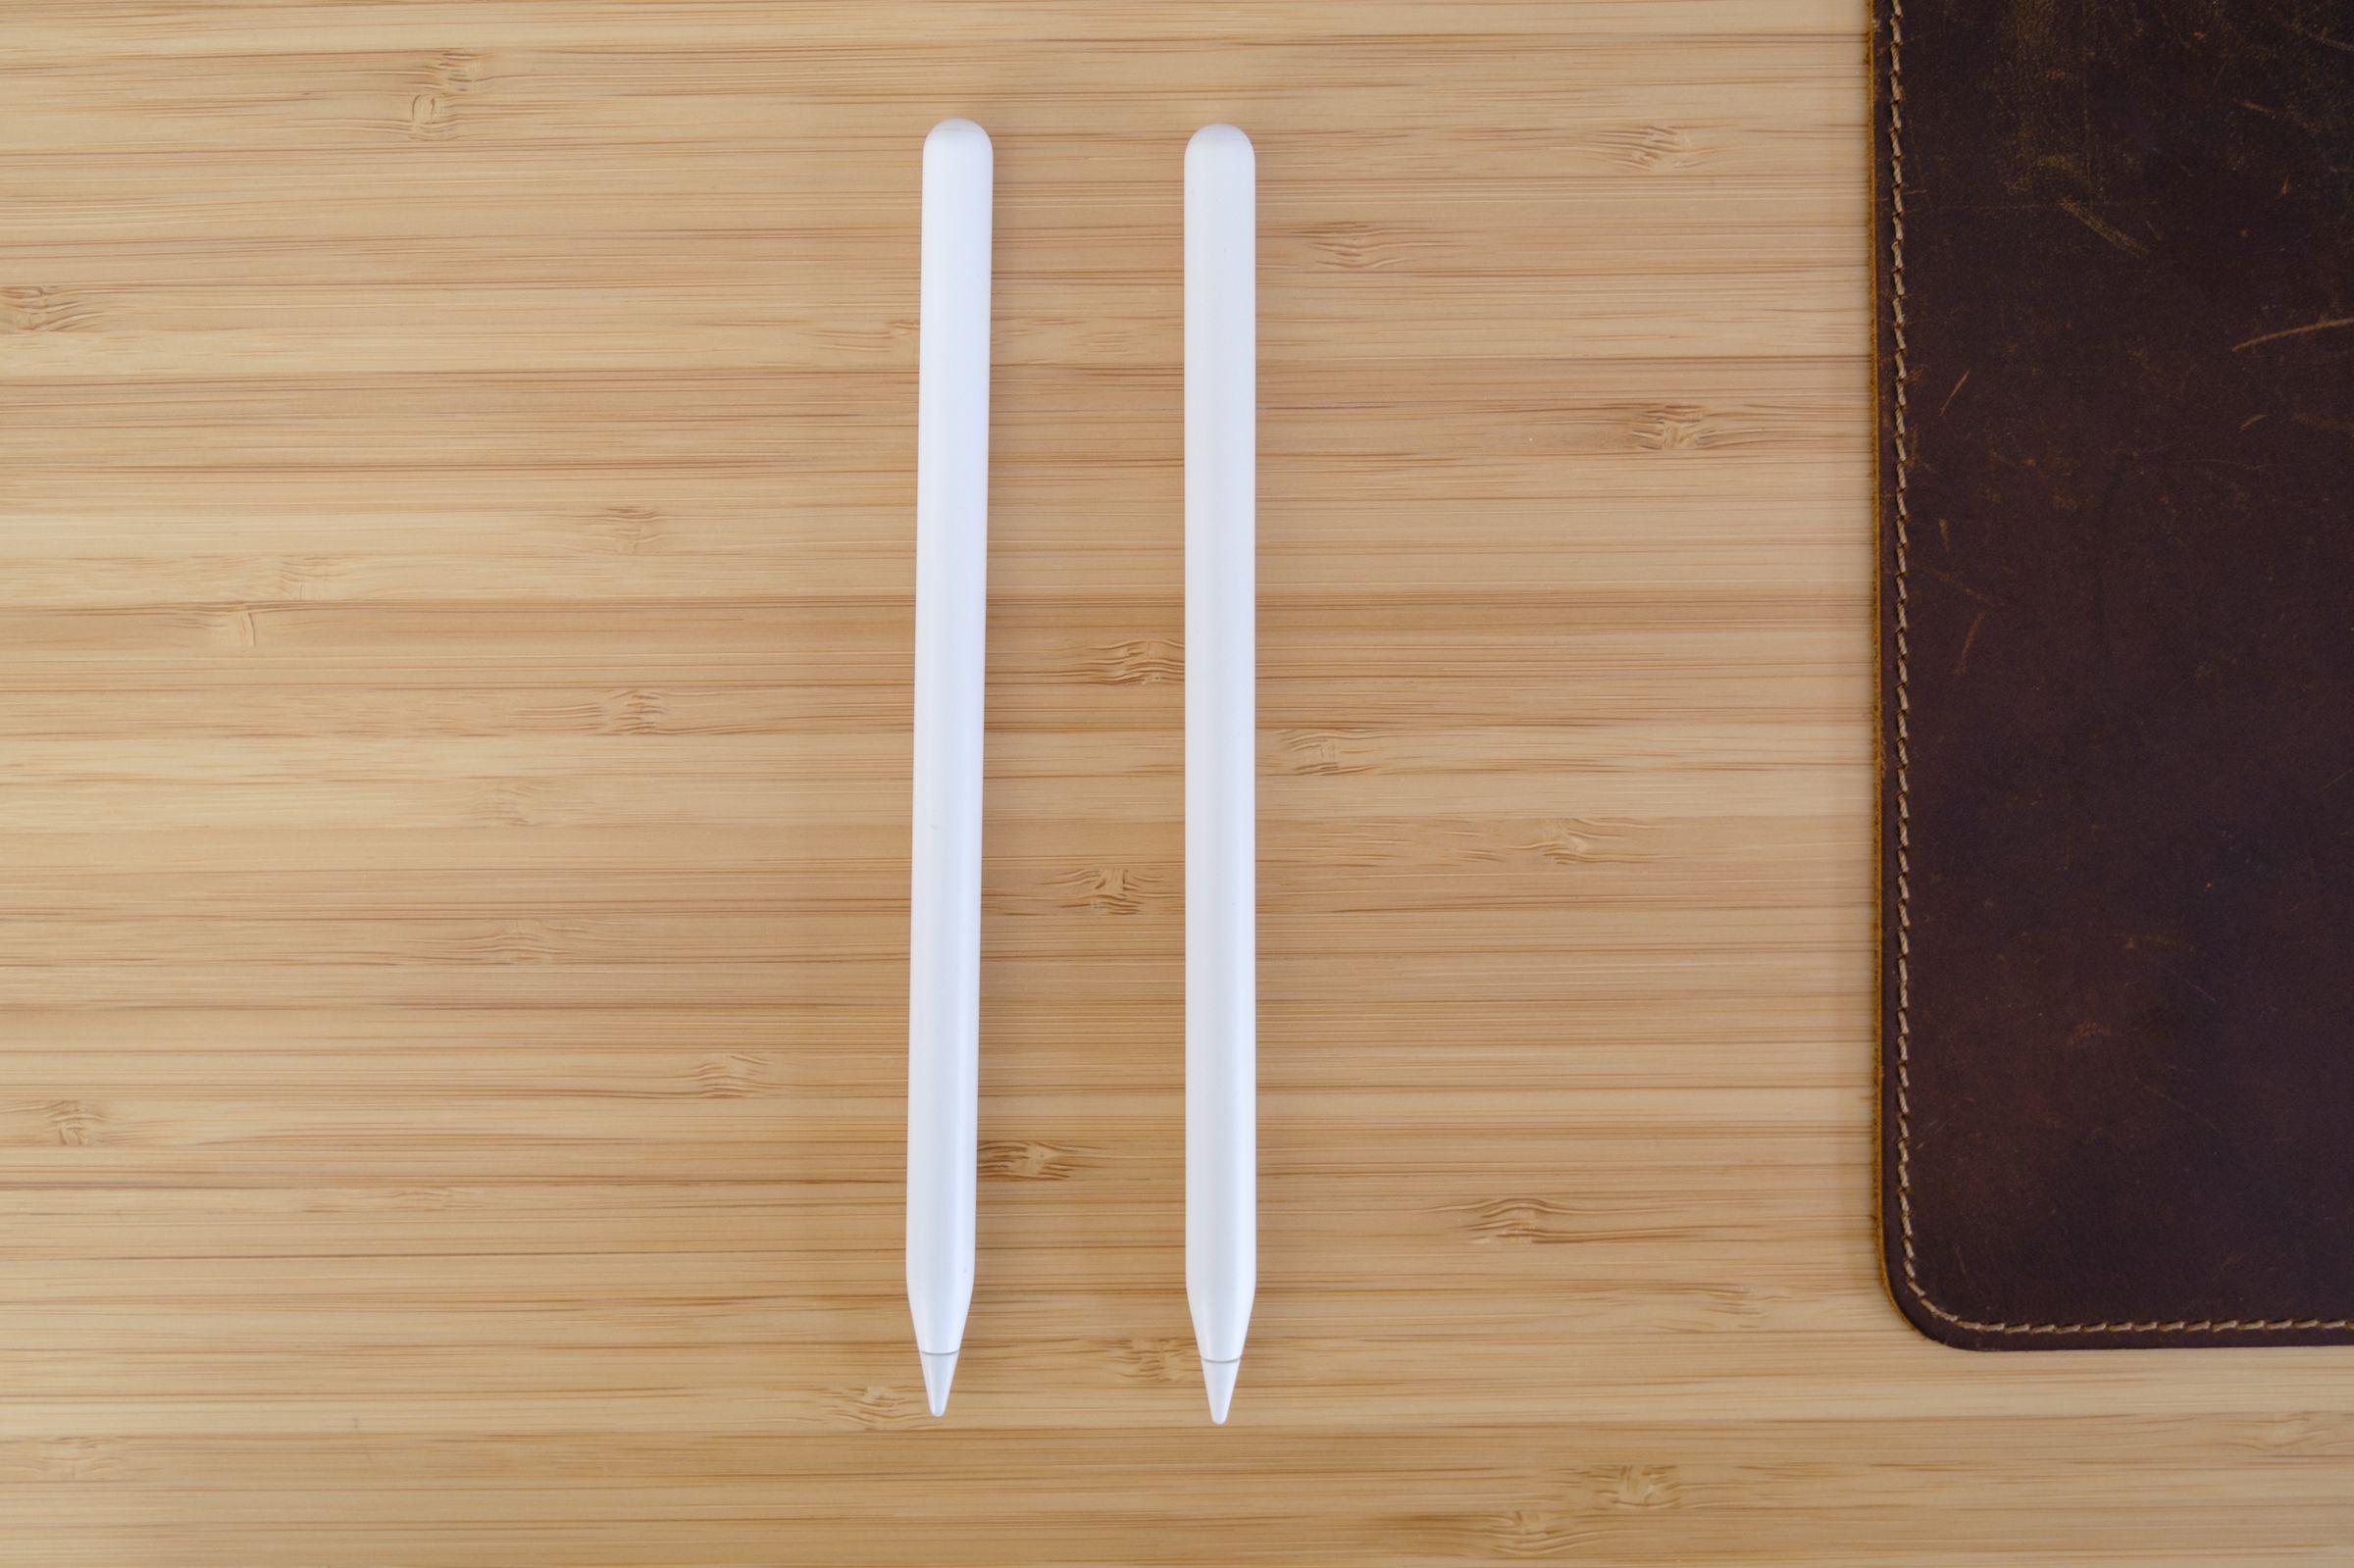 A second-generation Apple Pencil next to a StylusHome pencil.